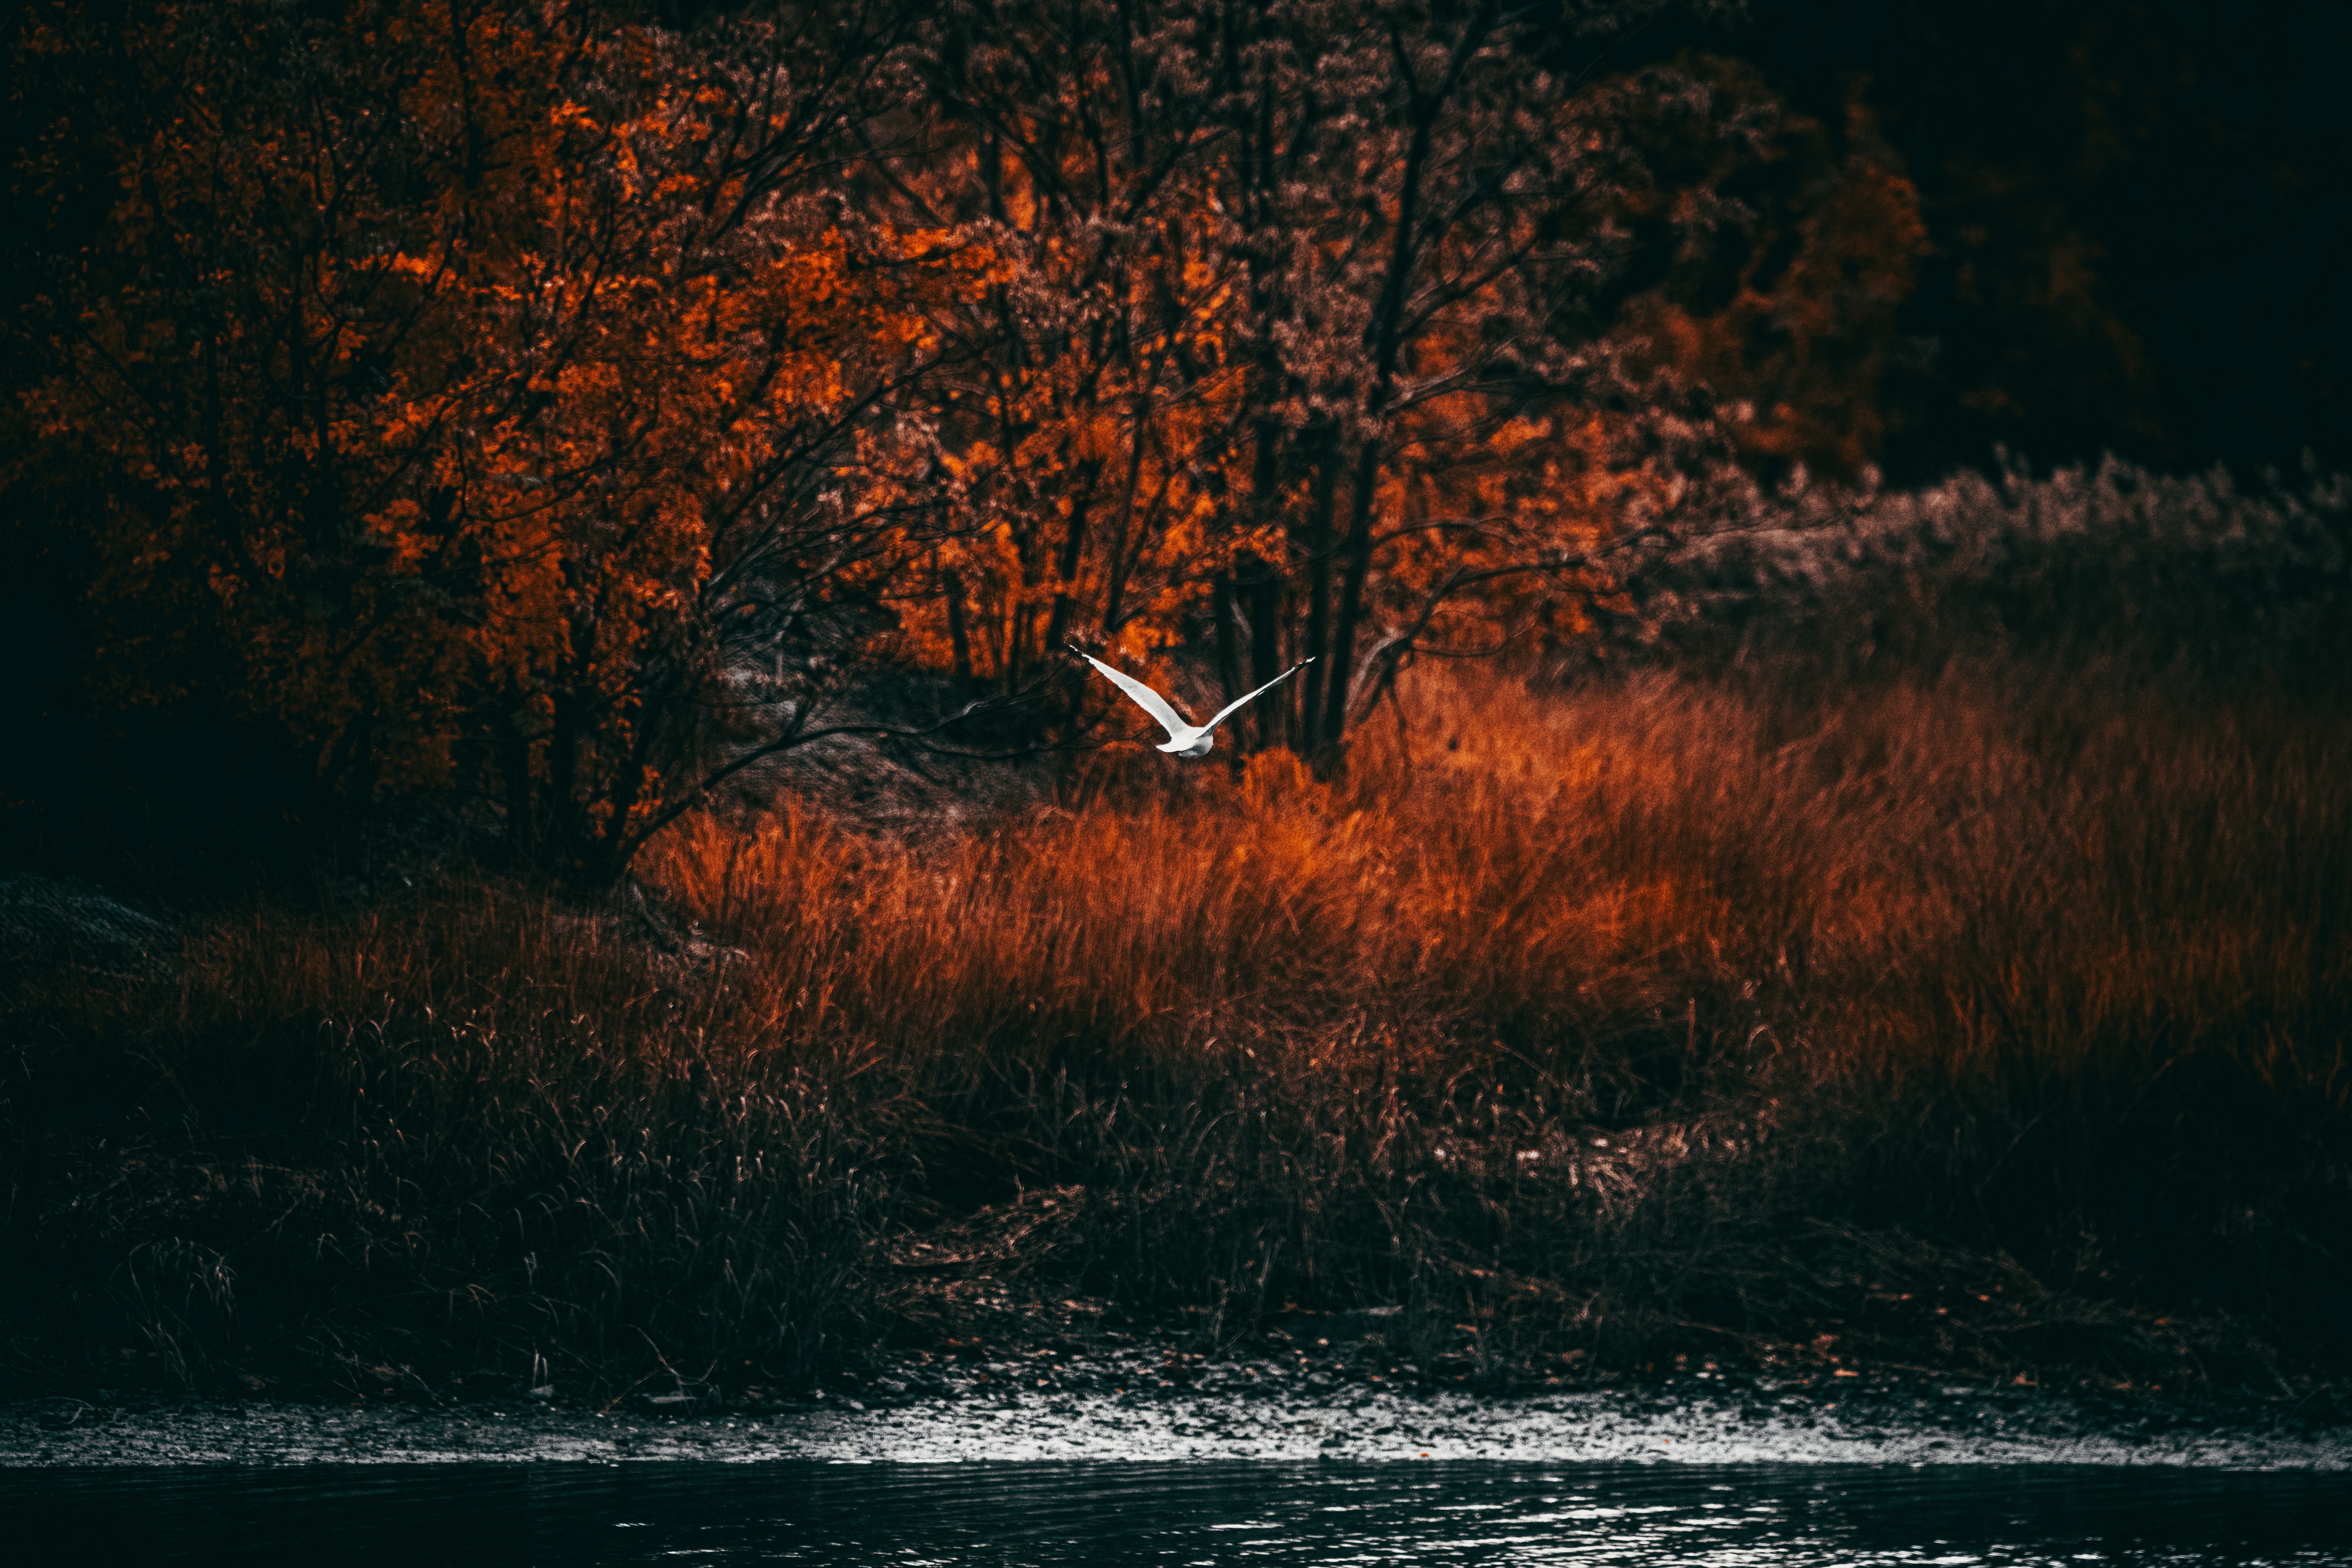 A road trip throughout New England is a great way to spend time in fall. 
pictured: a New England river with bright red trees and a single bird flying over the water